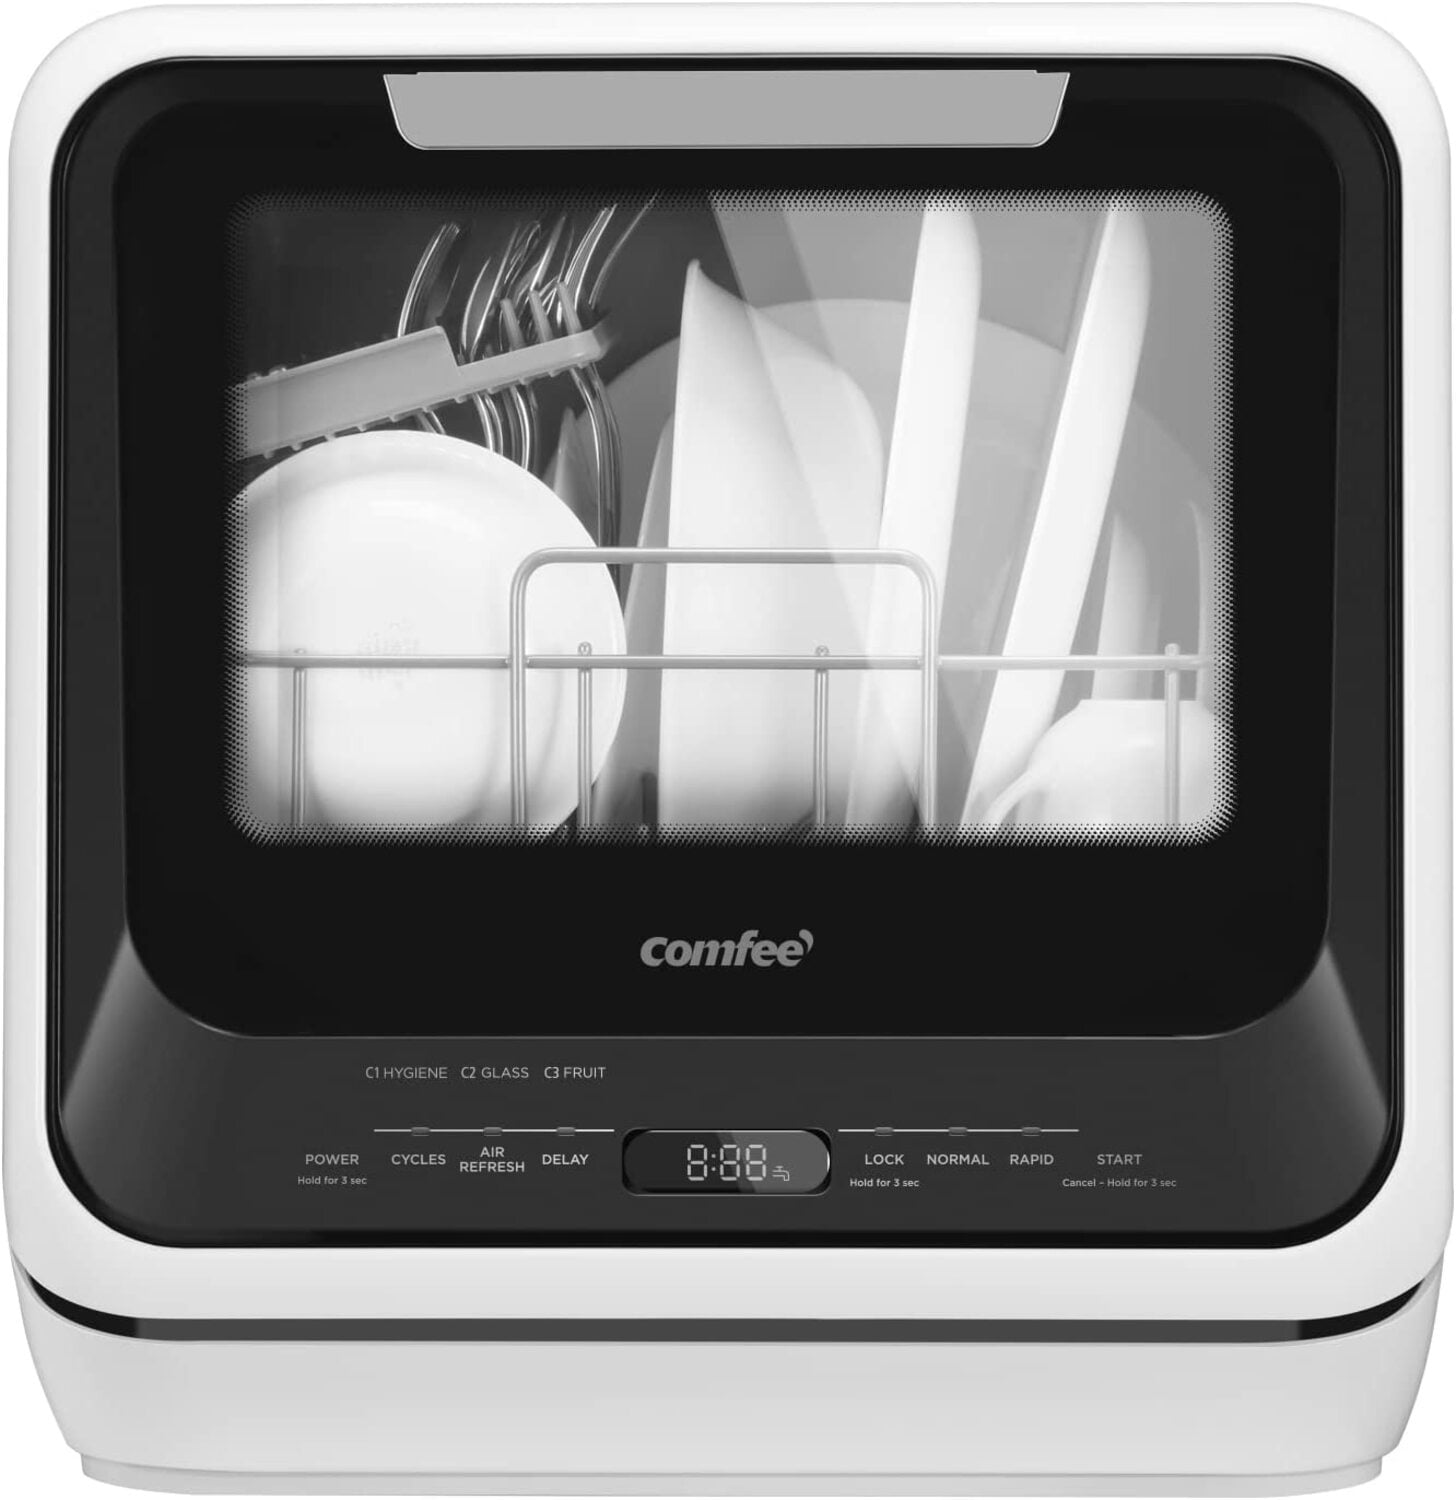 Countertop Dishwasher Portable Compact Dishwasher W/ 4 Washing Programs,  Energy Save with Low Water Consumption, No Installation for Small  Apartments